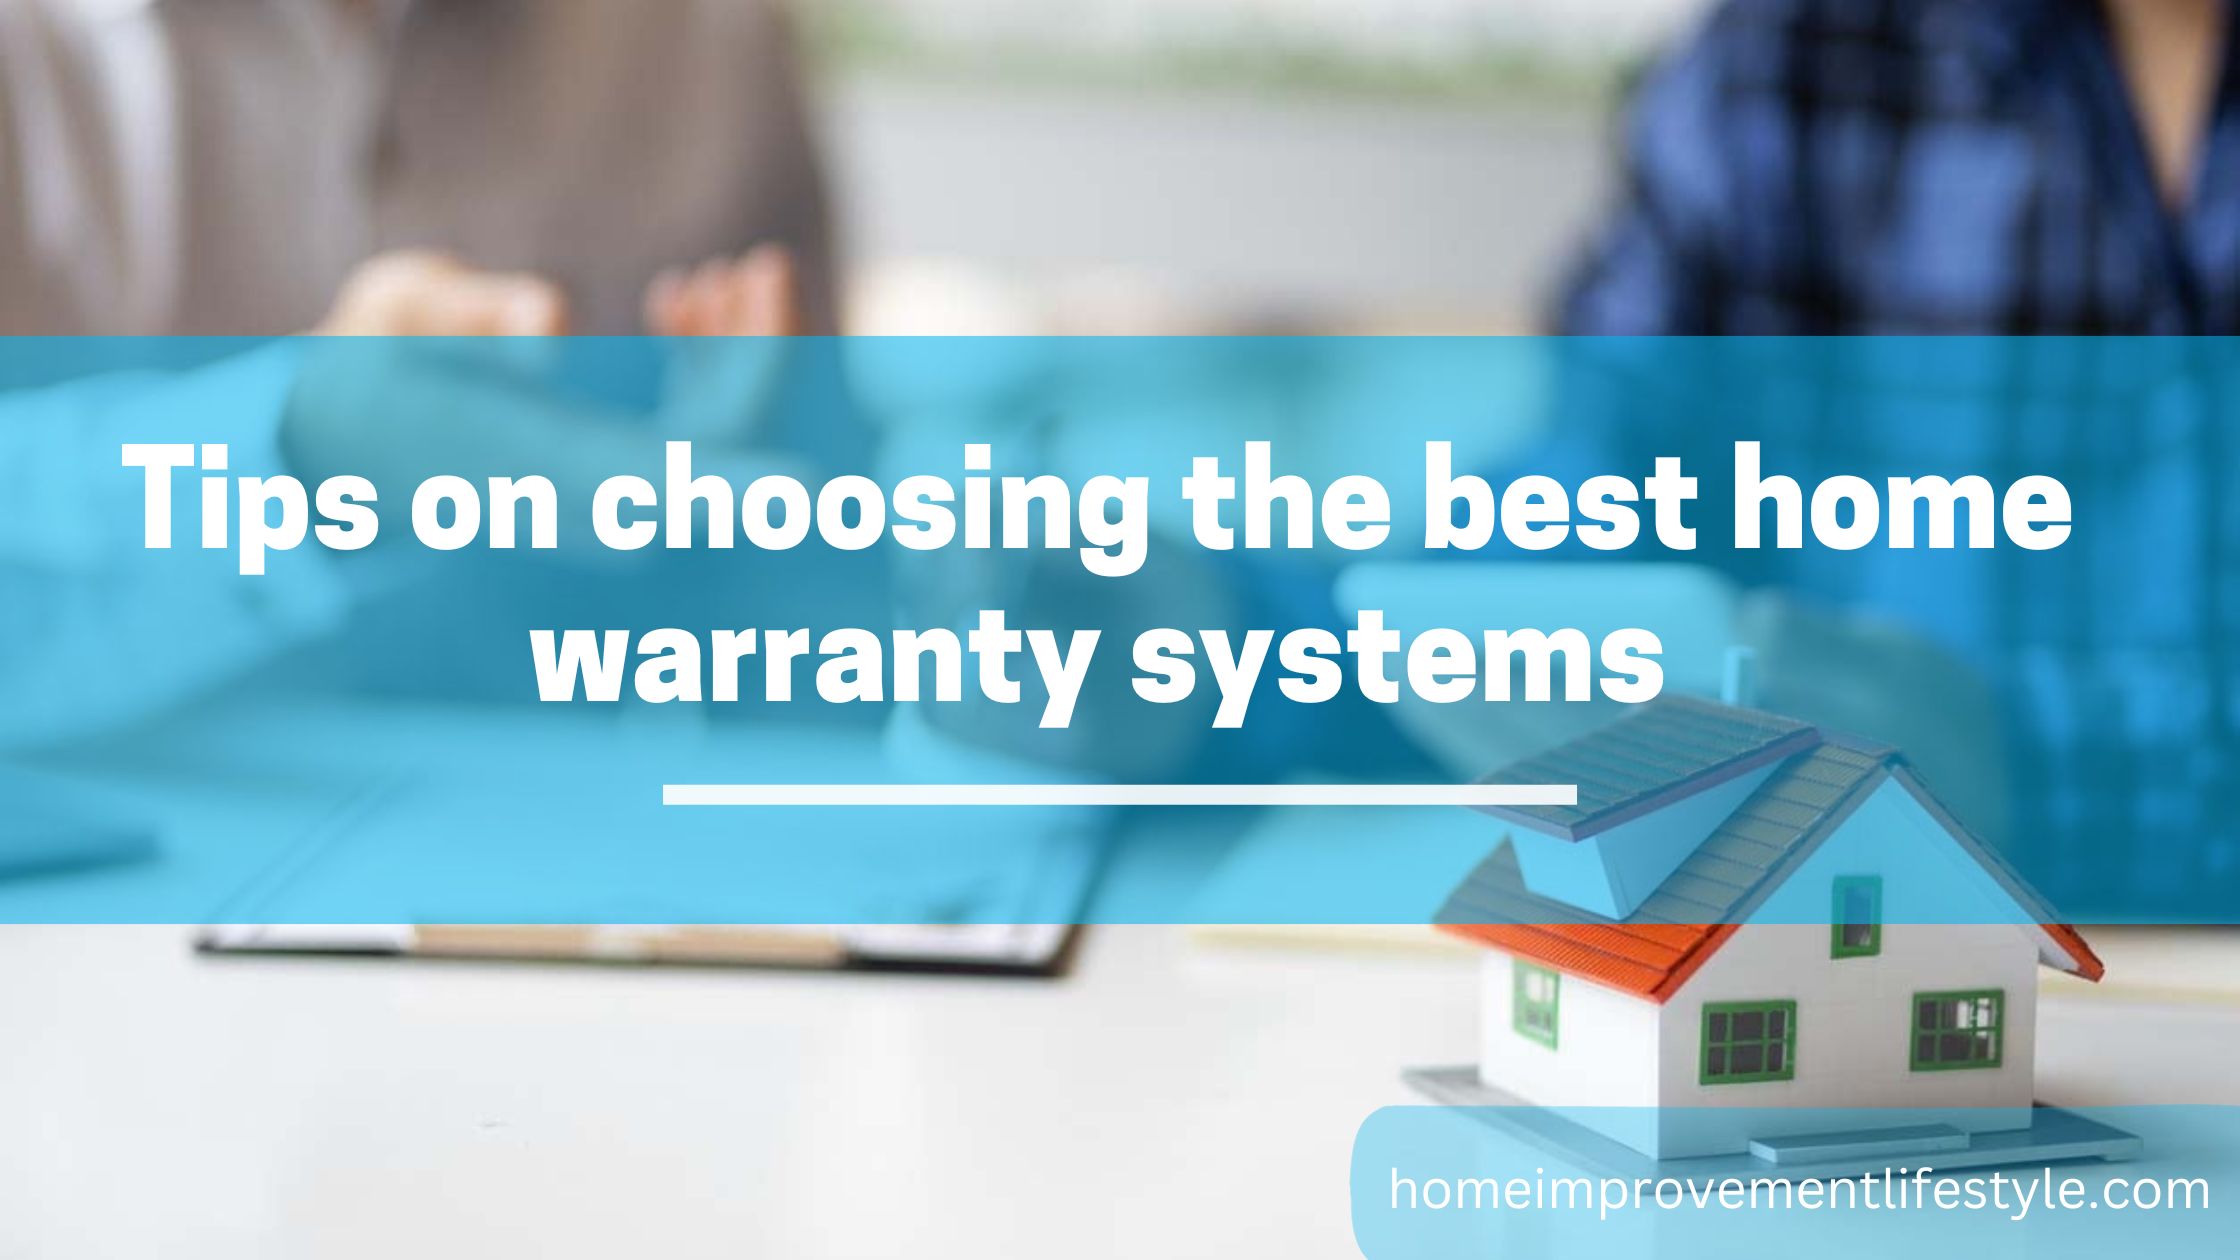 Tips on choosing the best home warranty systems